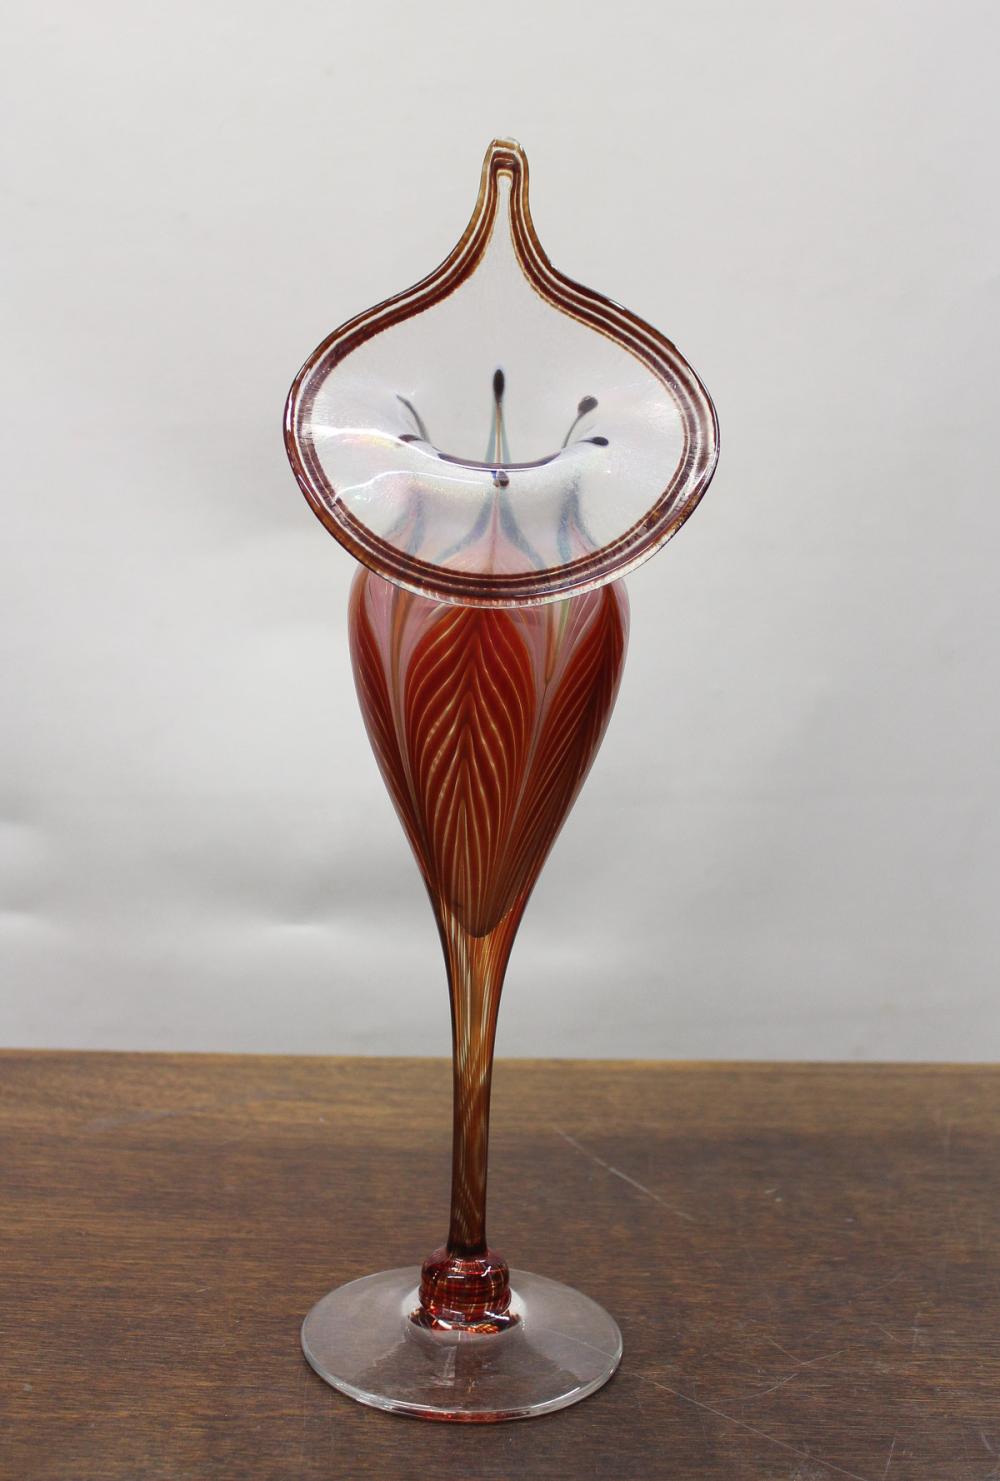 ART GLASS JACK-IN-THE-PULPIT VASE, WITH